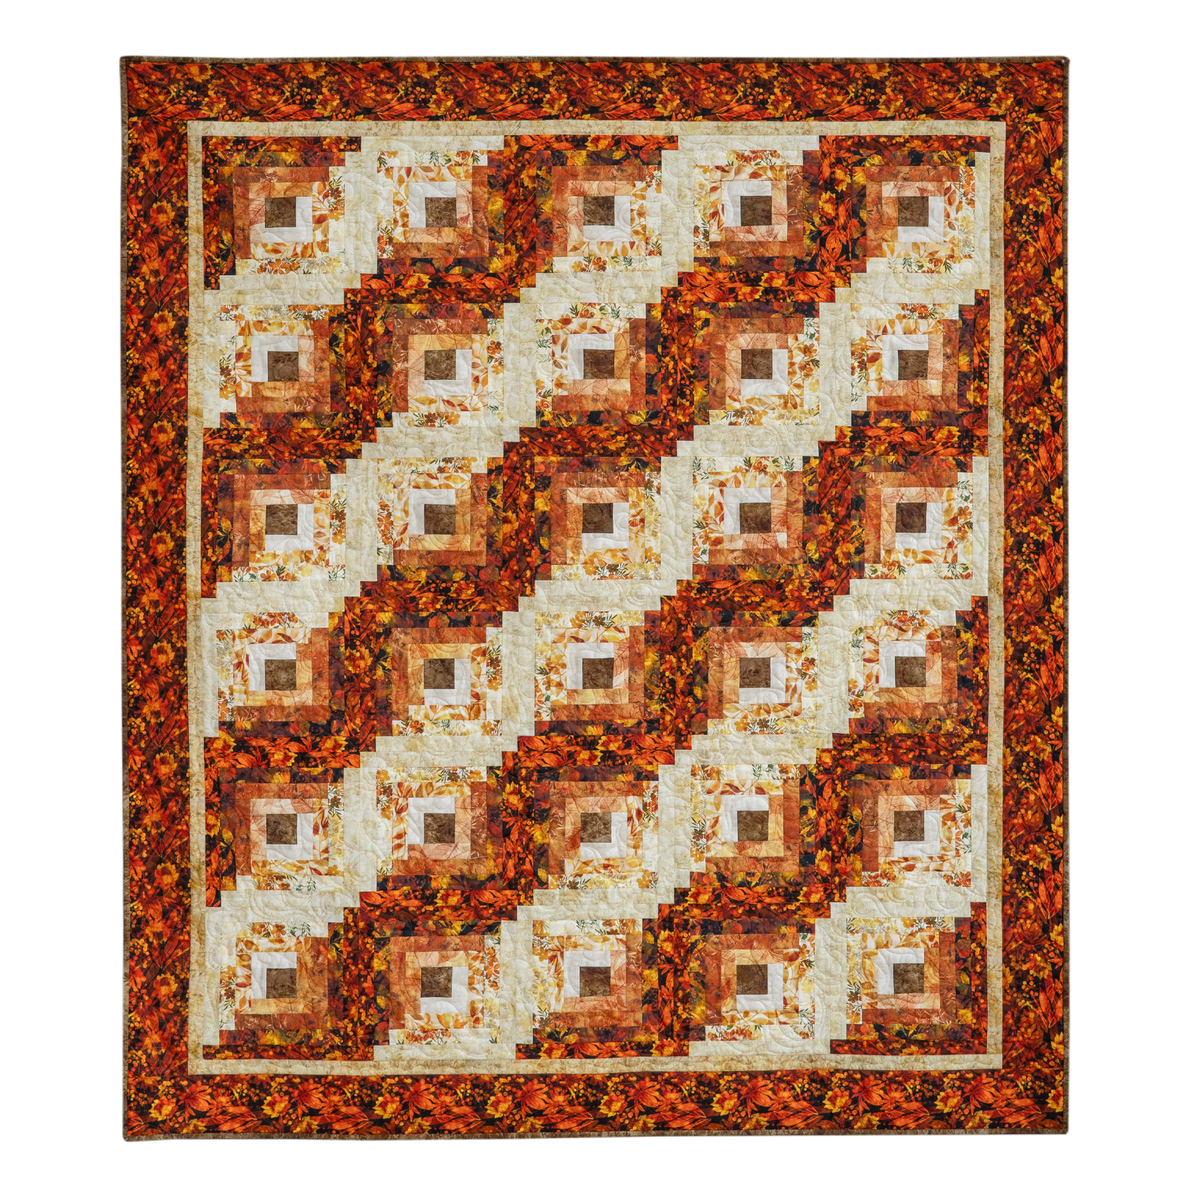 Capri Clear Reflections Quilt FREE Pattern Download